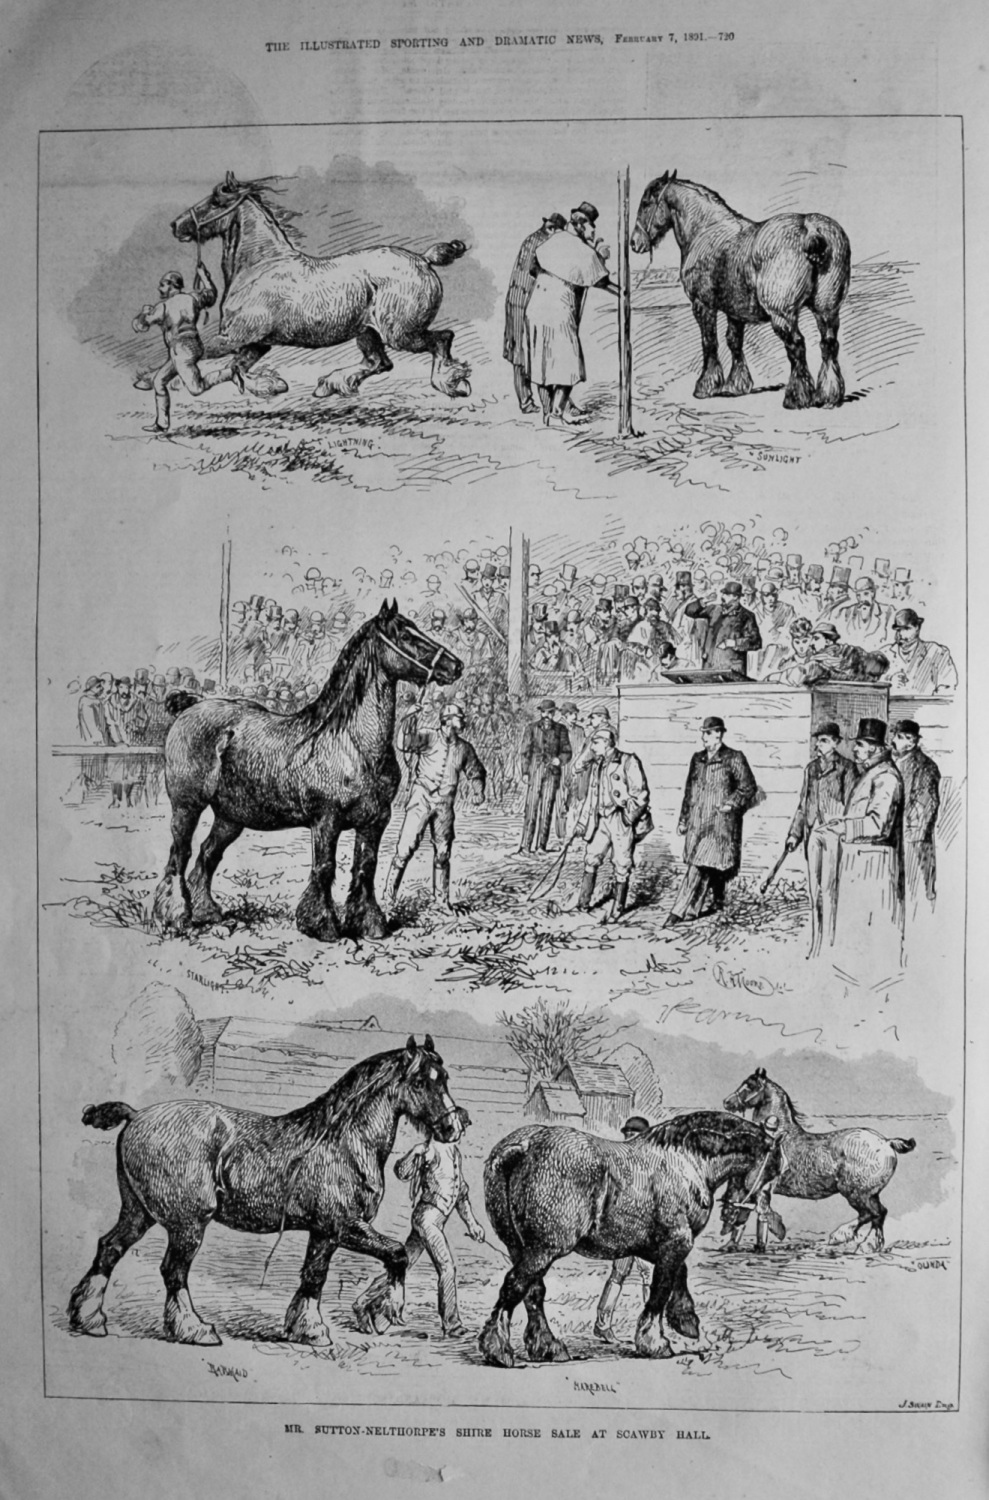 Mr. Sutton-Nelthorpe's Shire Horse Sale at Scawby Hall. 1891.